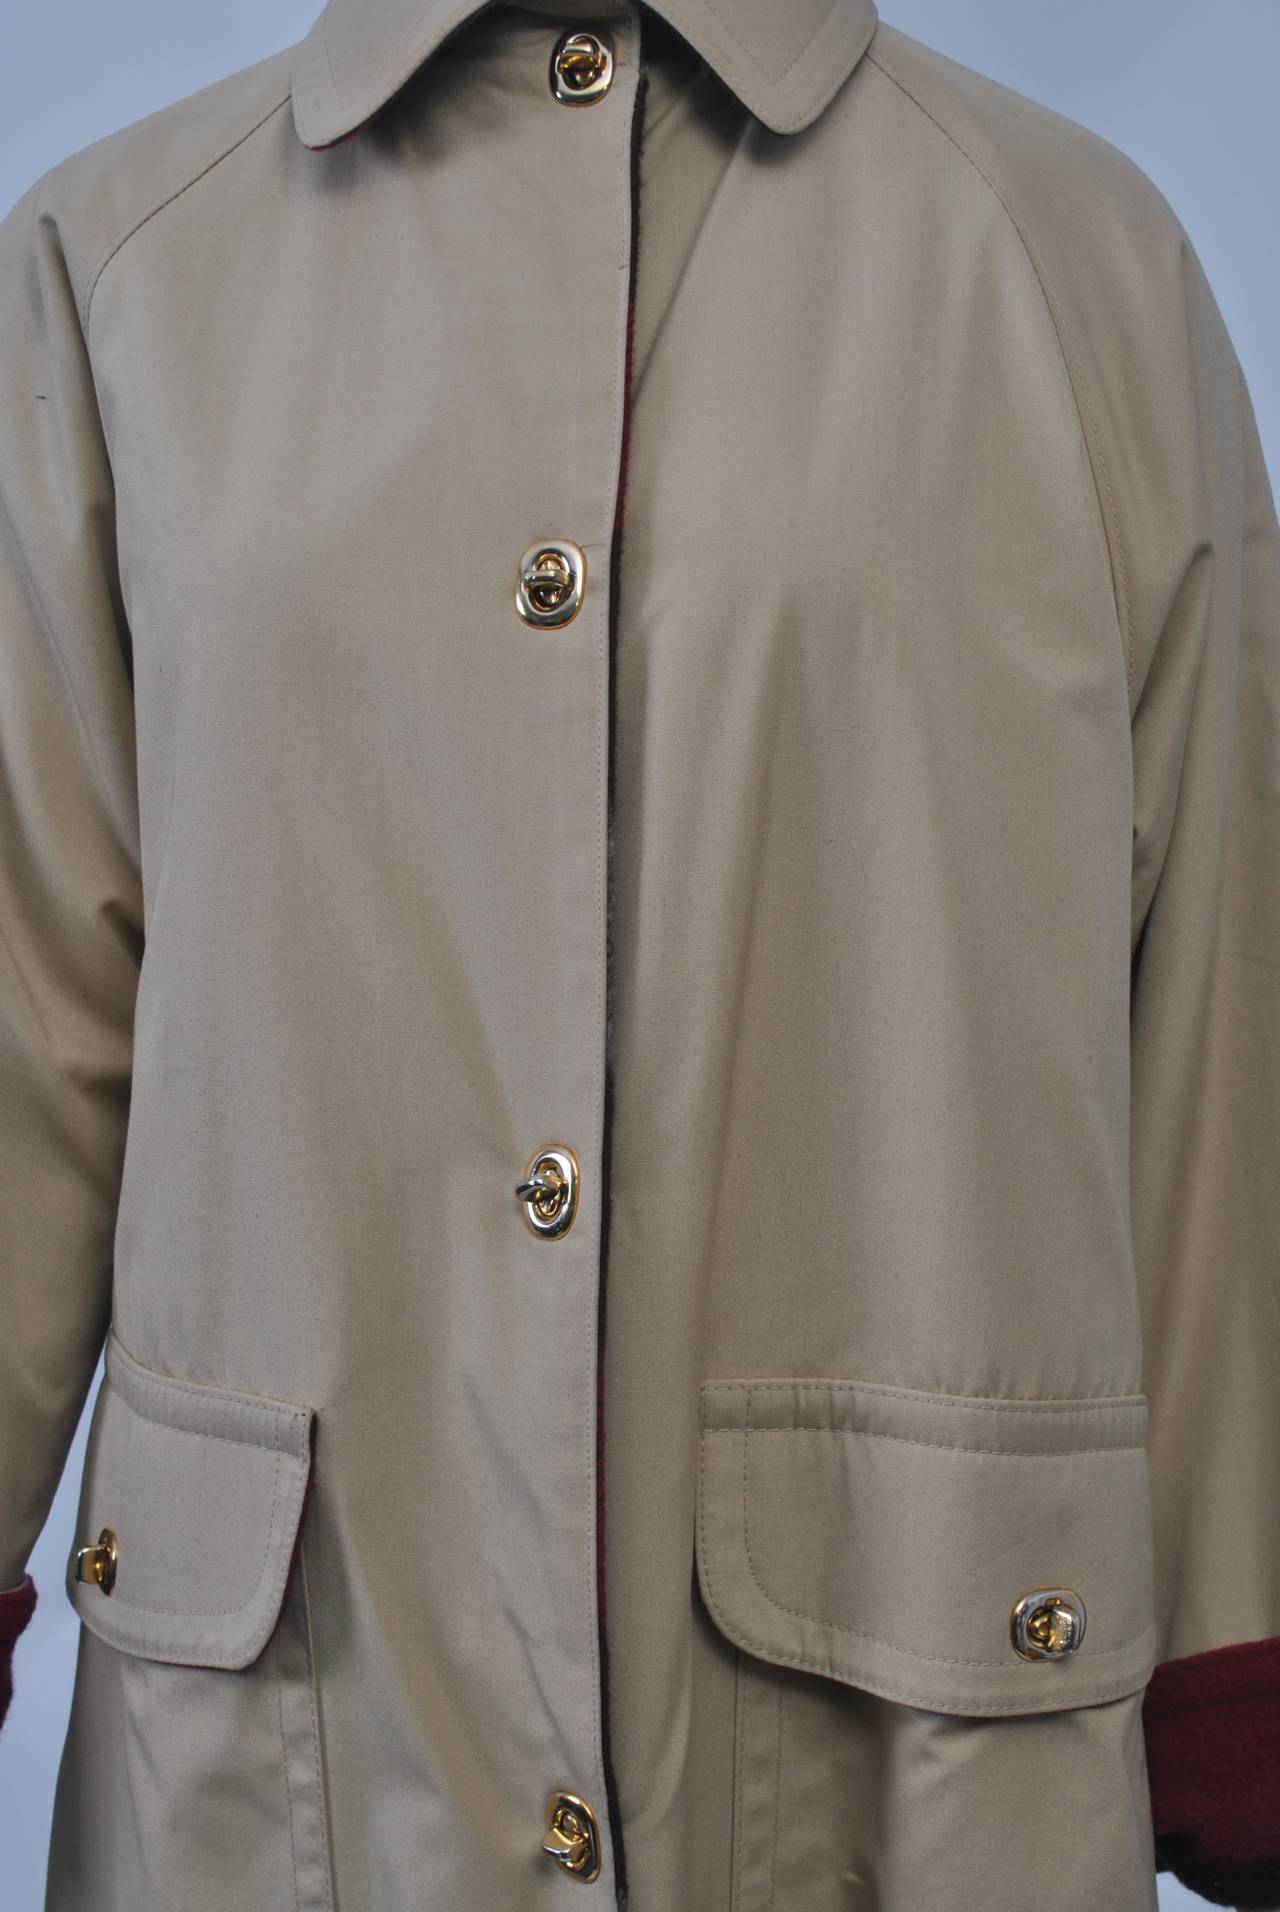 Beige Bonnie Cashin All-Weather Coat with Plaid Lining